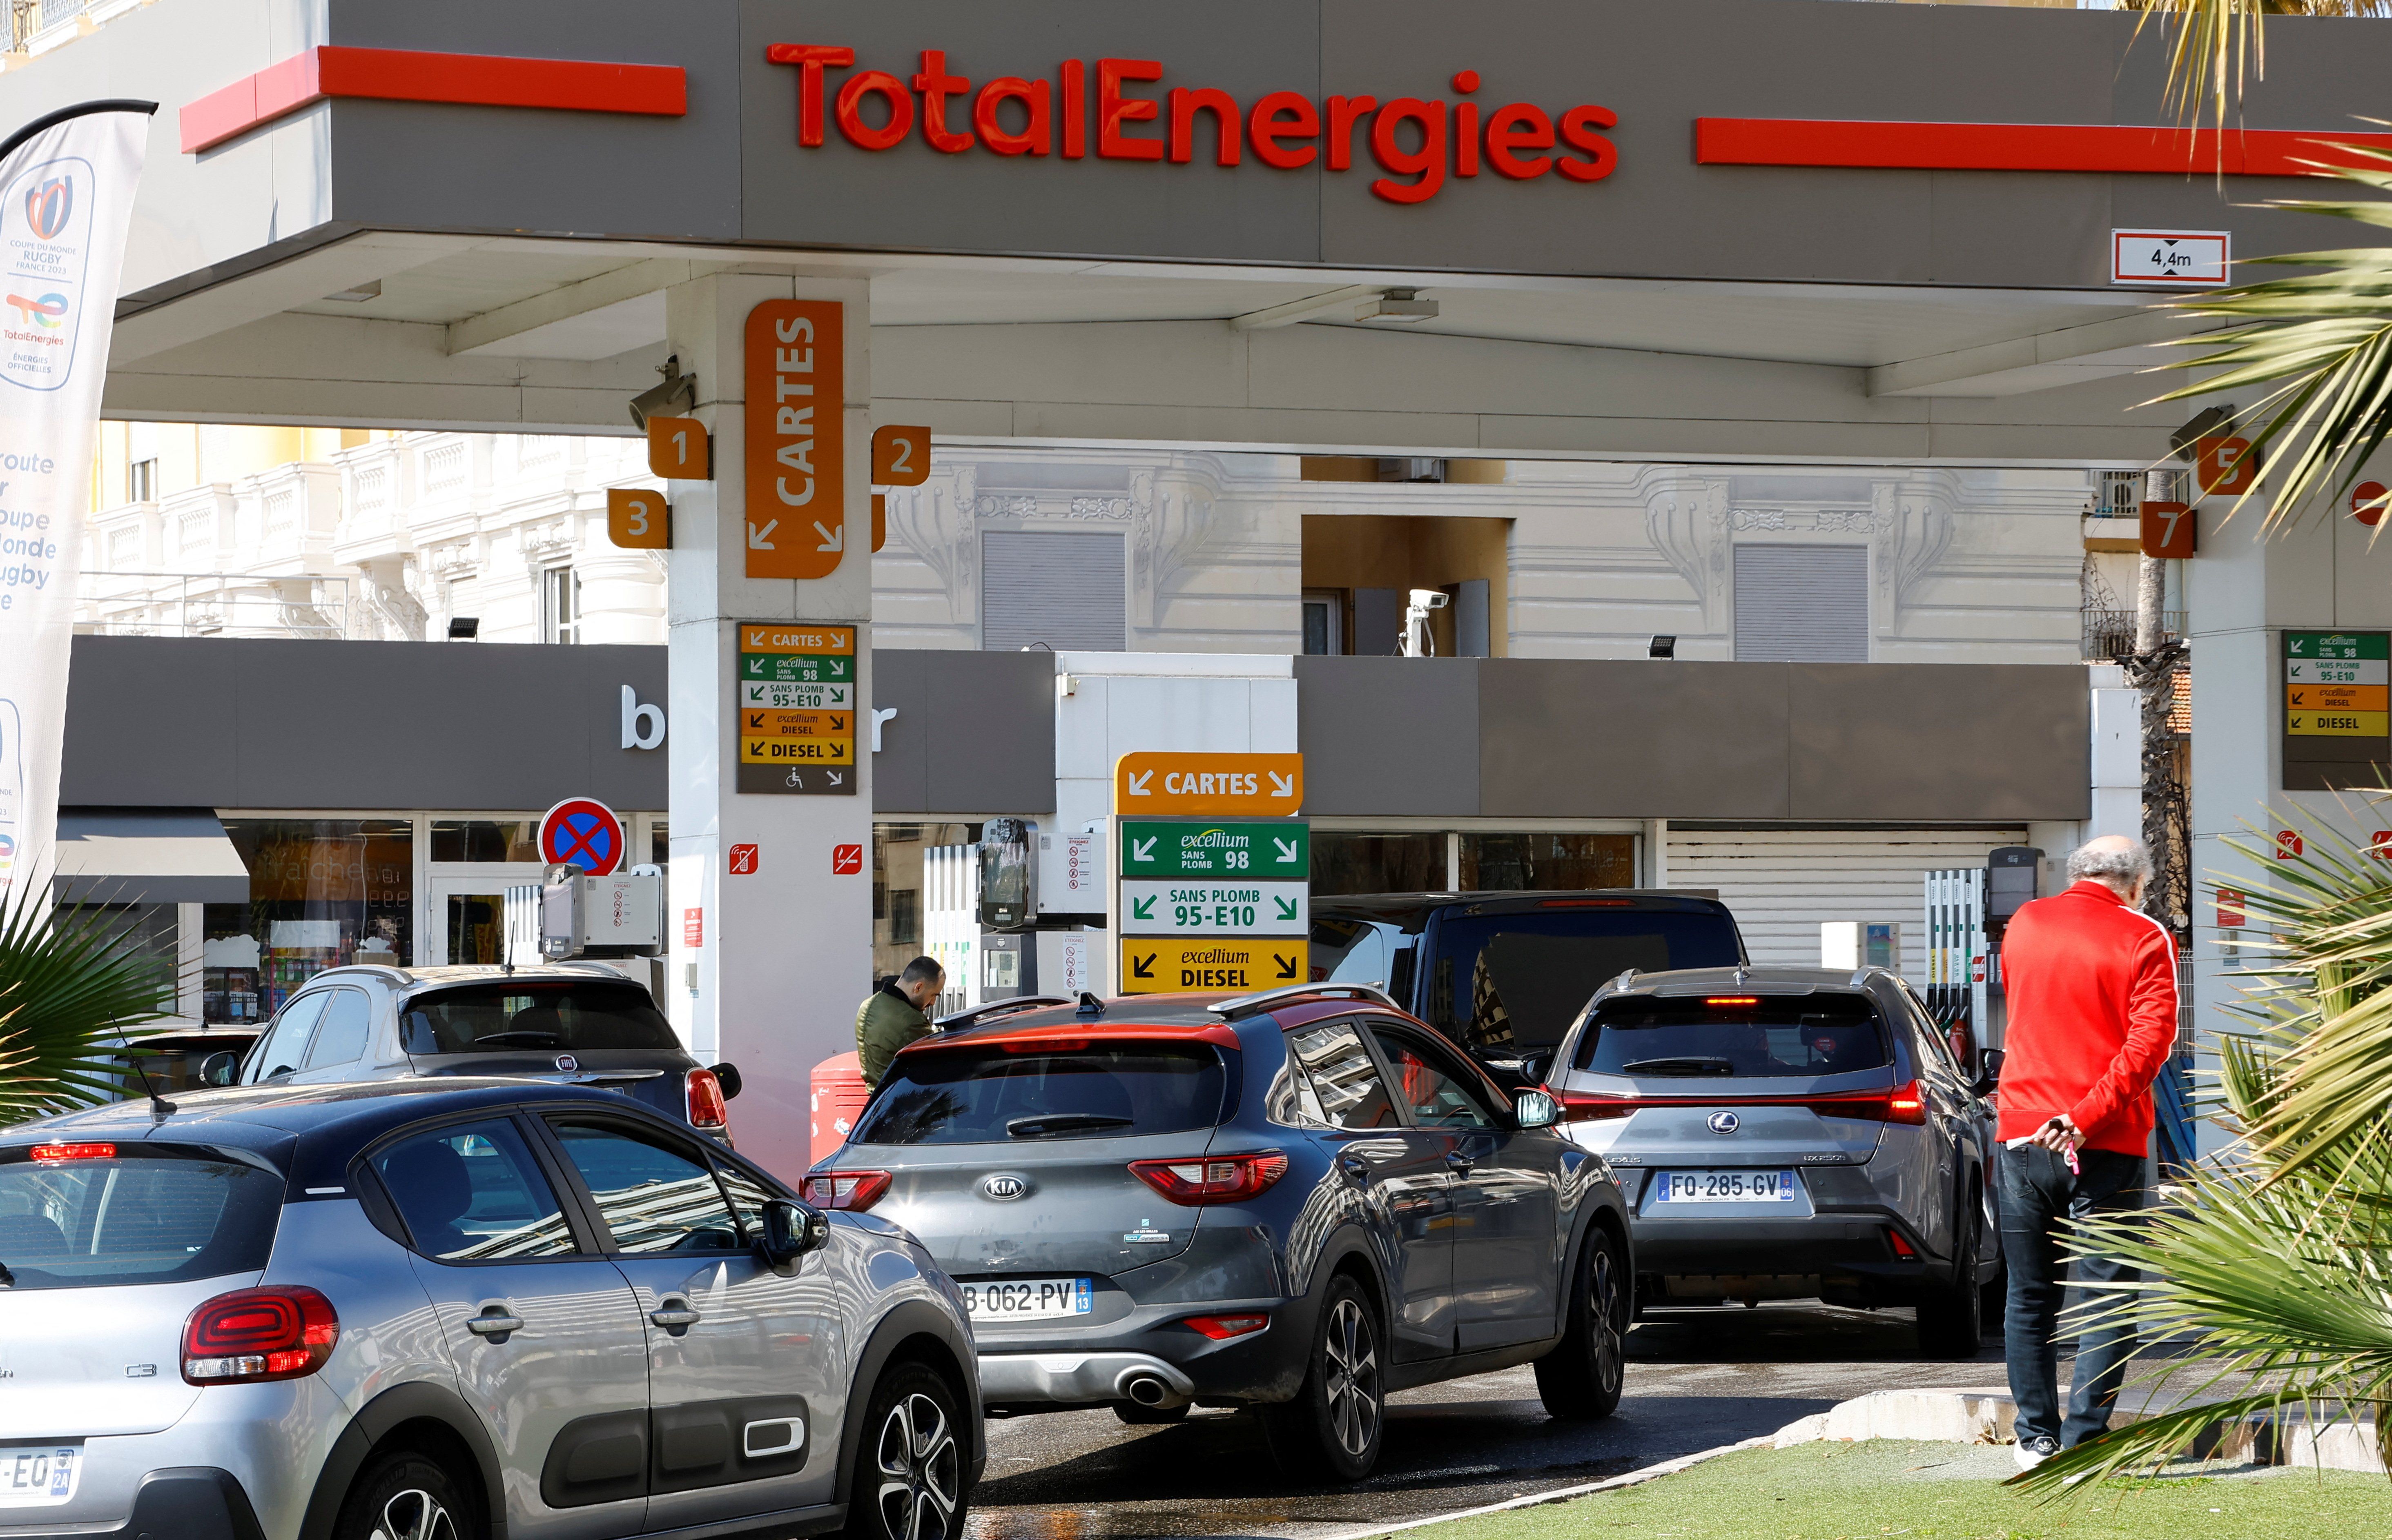 Car drivers queue to fill their fuel tank at a TotalEnergies gas station in Nice as petrol supplies are disrupted by a strike of French refineries and depots, France, March 20, 2023.